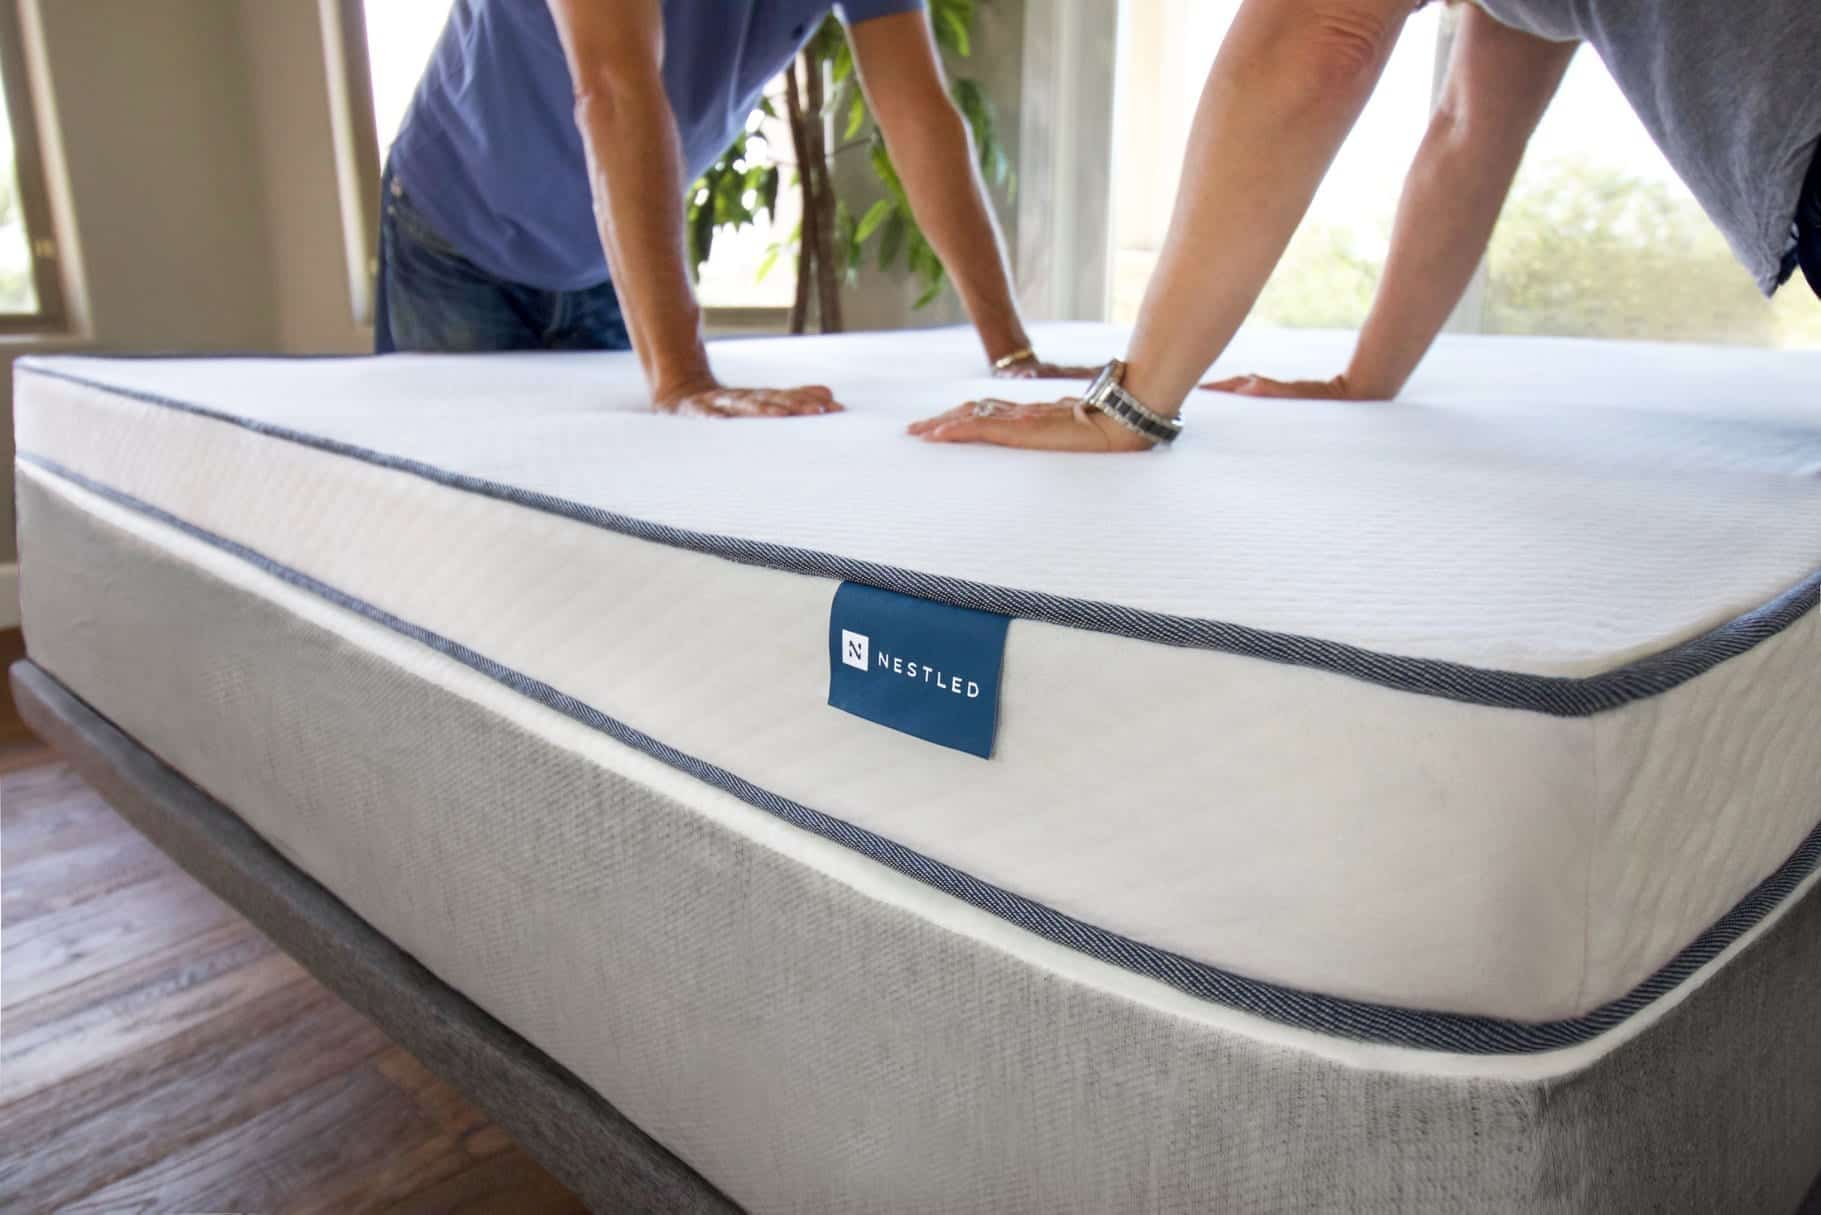 Three Interesting Facts About Naturally Nestled Mattress Toppers